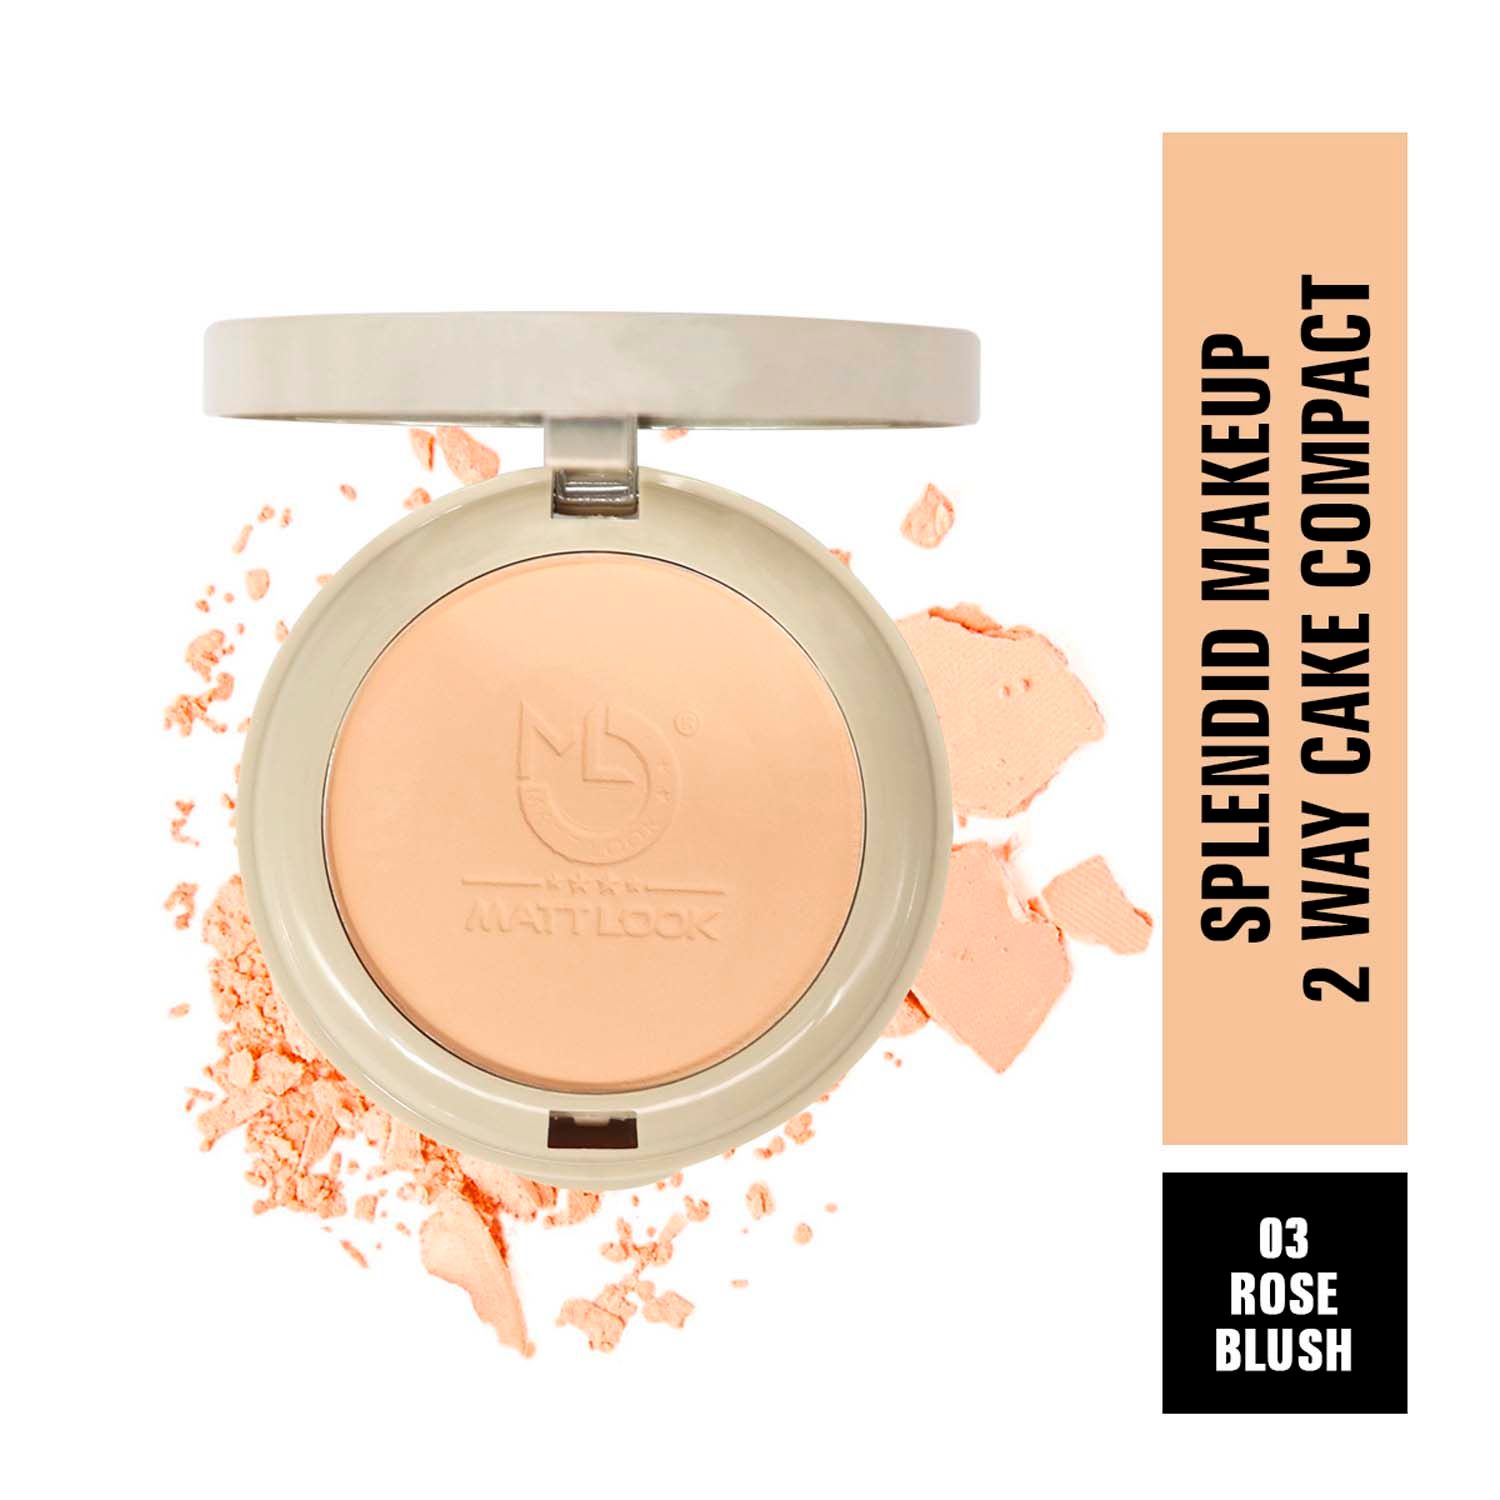 Buy Matt look Splendid Makeup 2 Way Cake Compact, Clear Without Flaws, Rose Blush (20gm) - Purplle